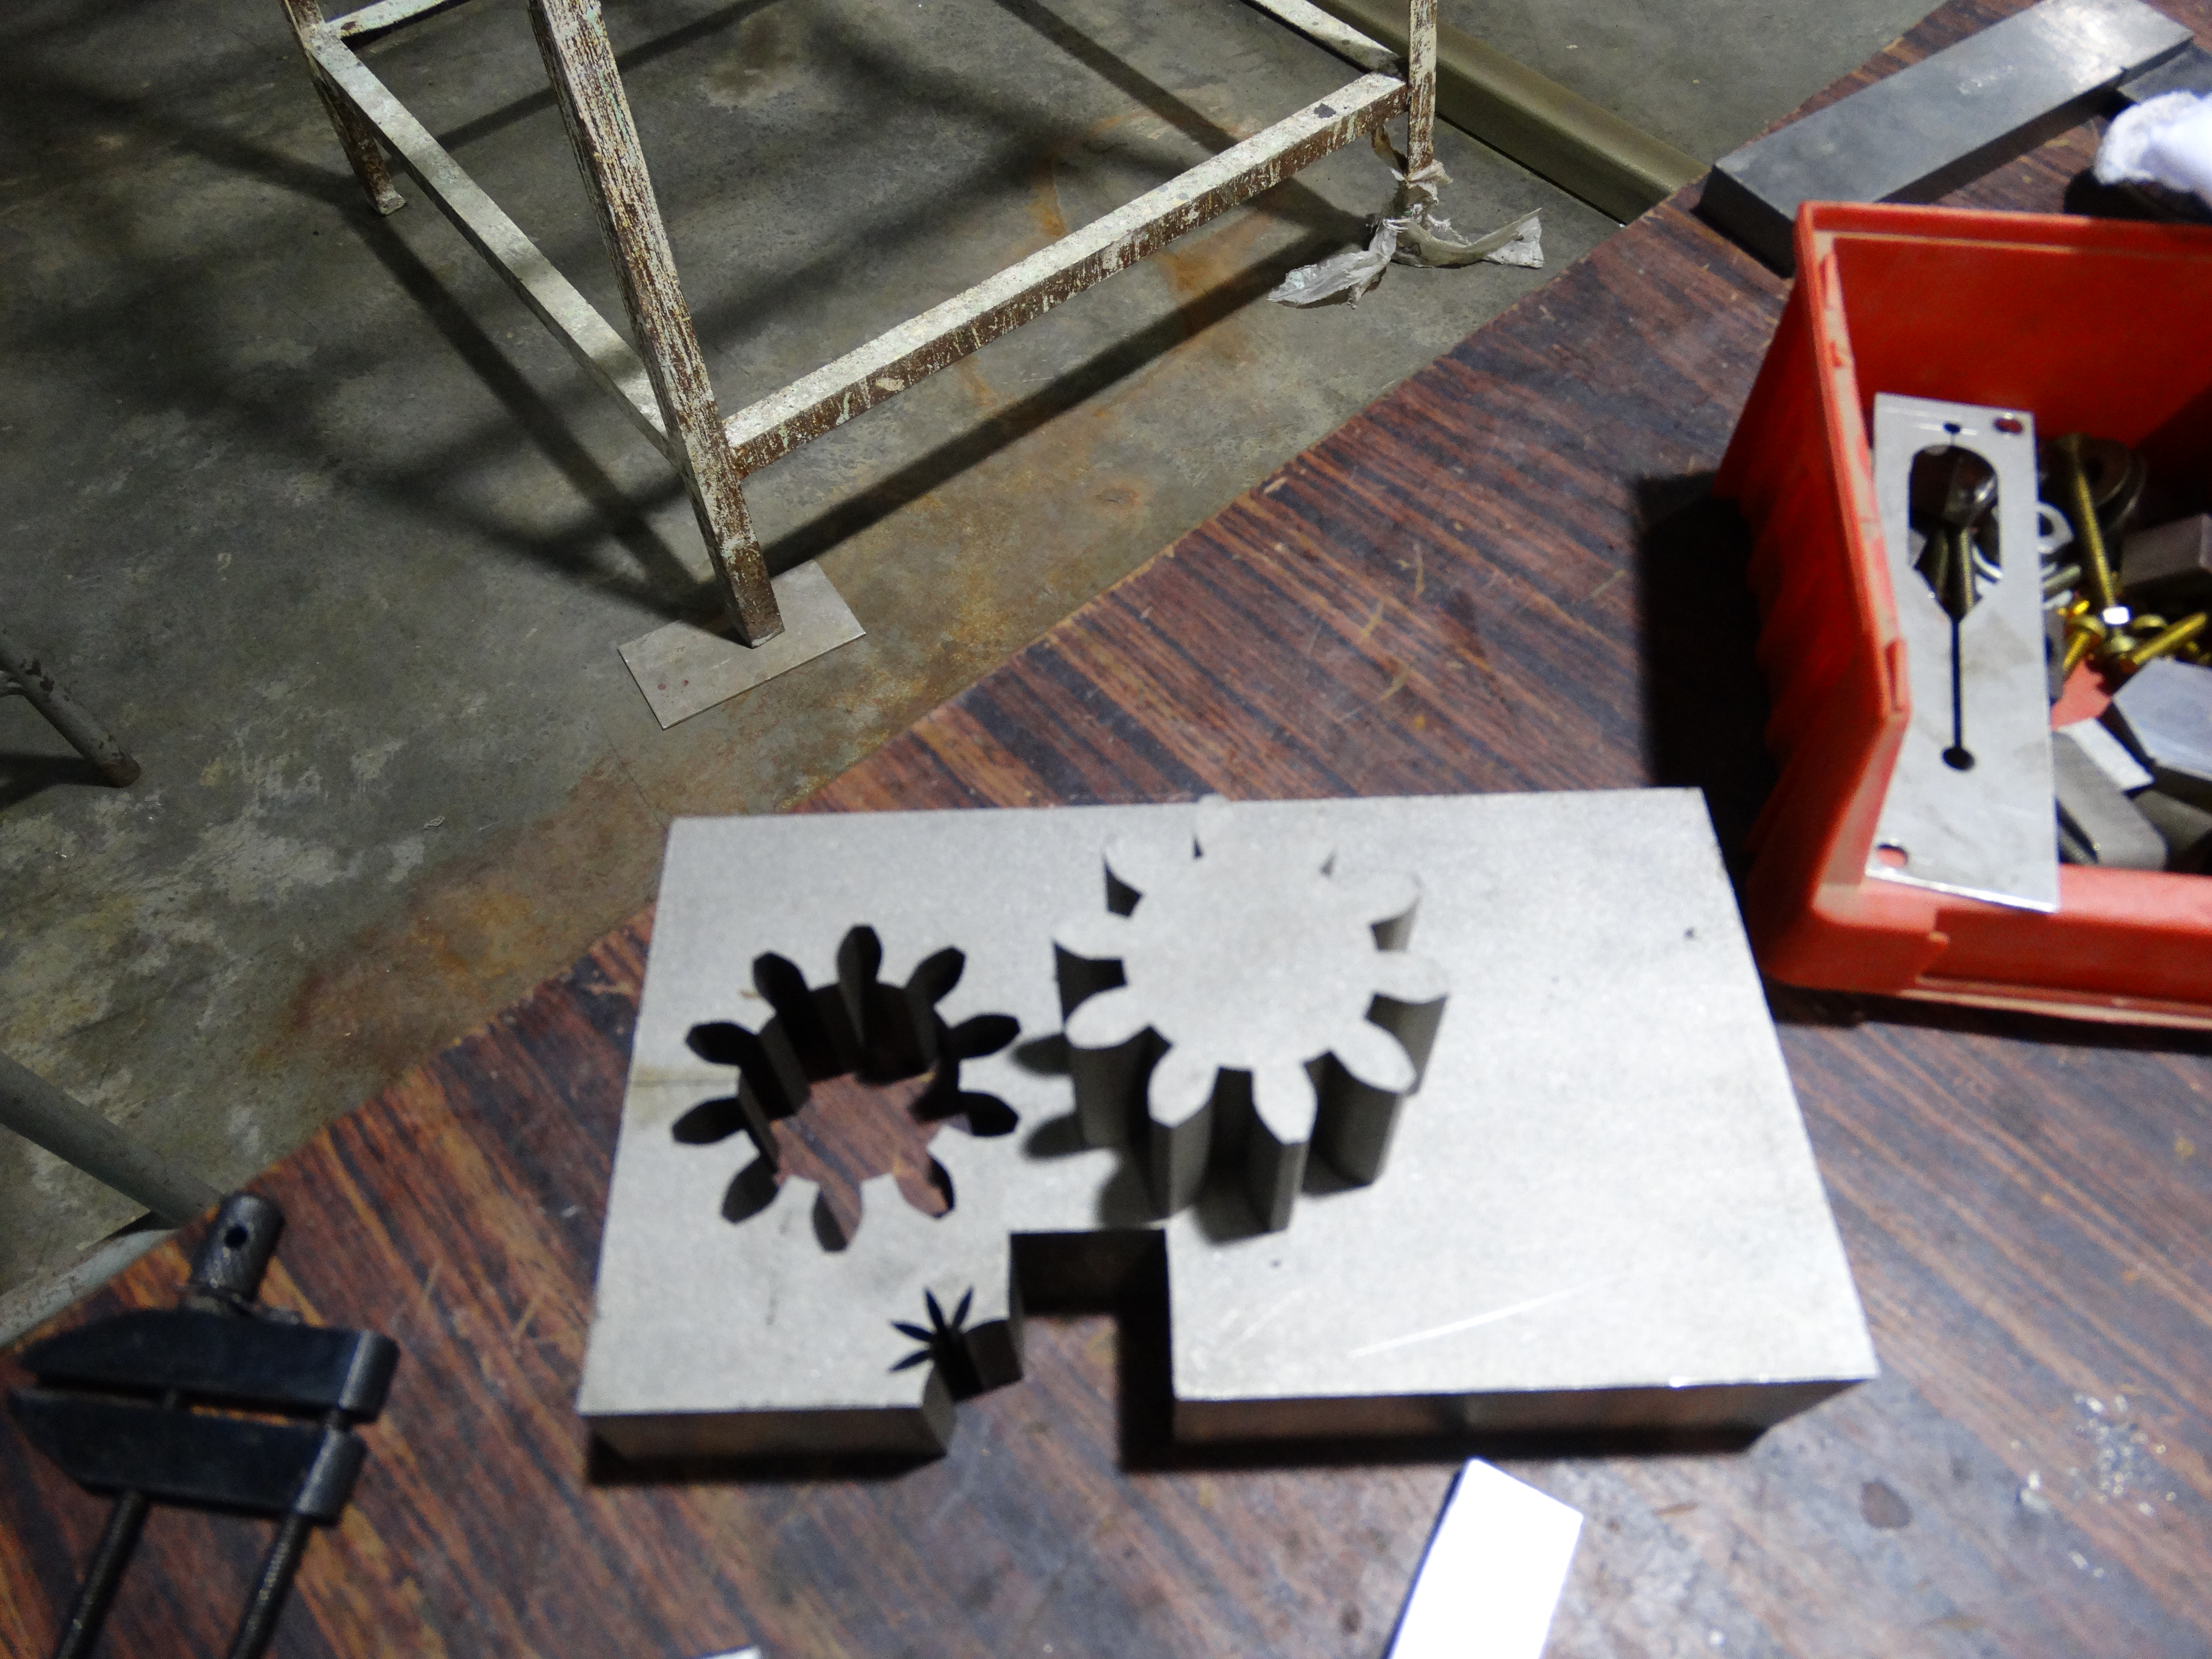 Components fabricated using various machines and manual skill